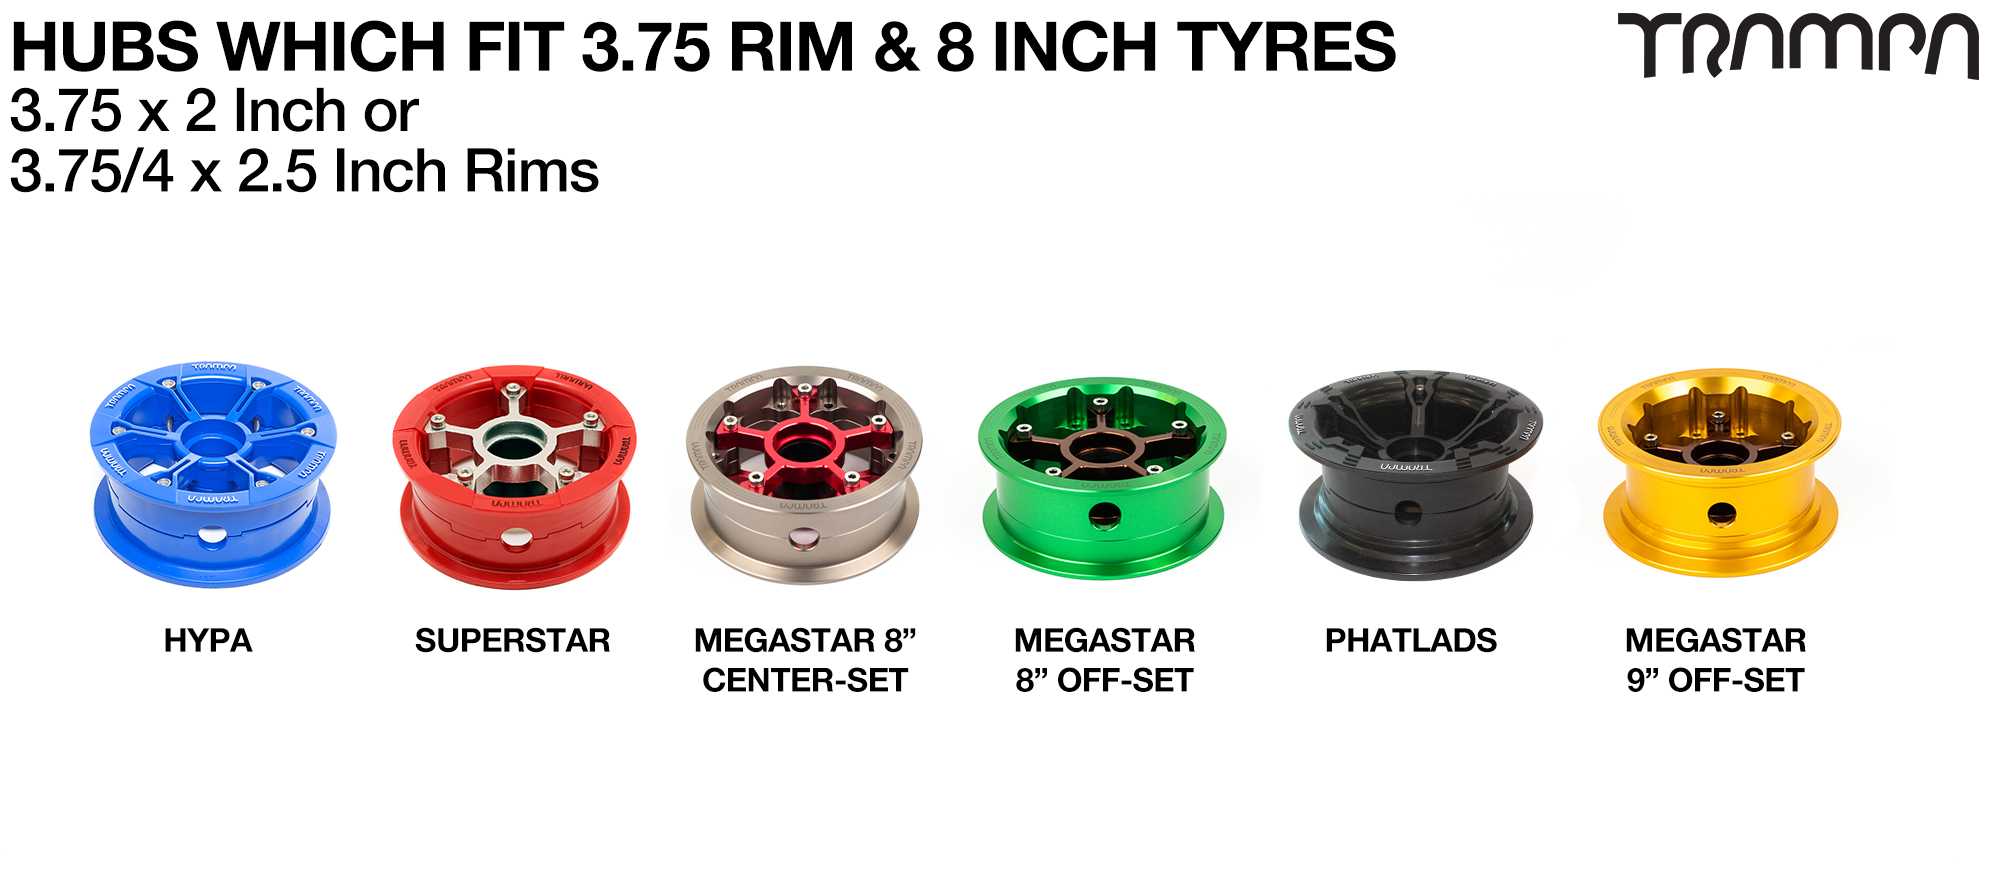 GOLFA PHATTY 8 inch Tyre measure 3.75x 3x 8 Inch or 200x75mm with 3.75 inch Rim will fit to DEEP-DISH MEGASTAR 8 3.75x 2.5 inch Hubs